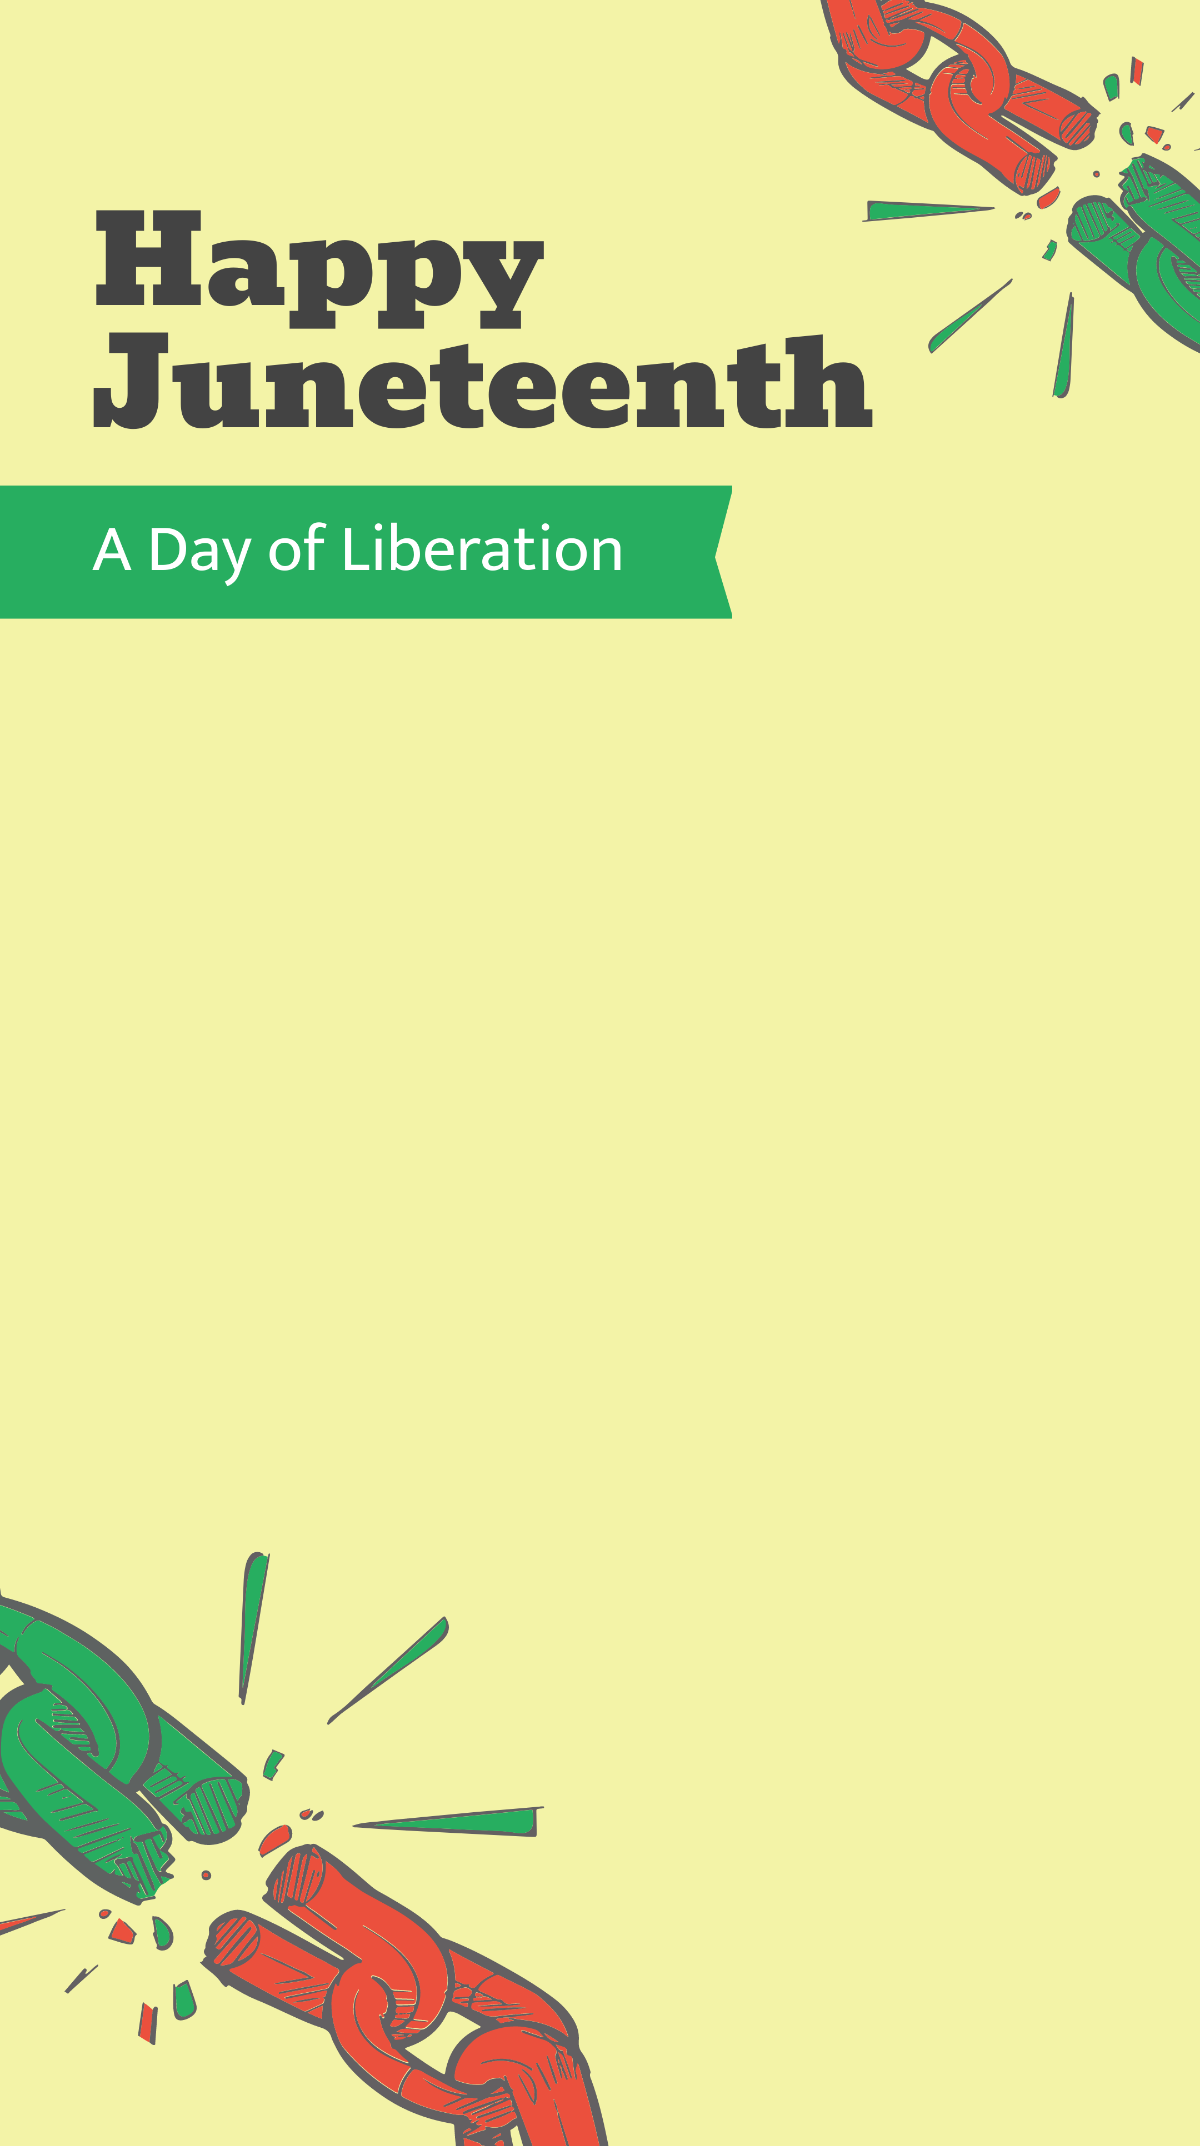 Free Happy Juneteenth Snapchat Geofilter Template